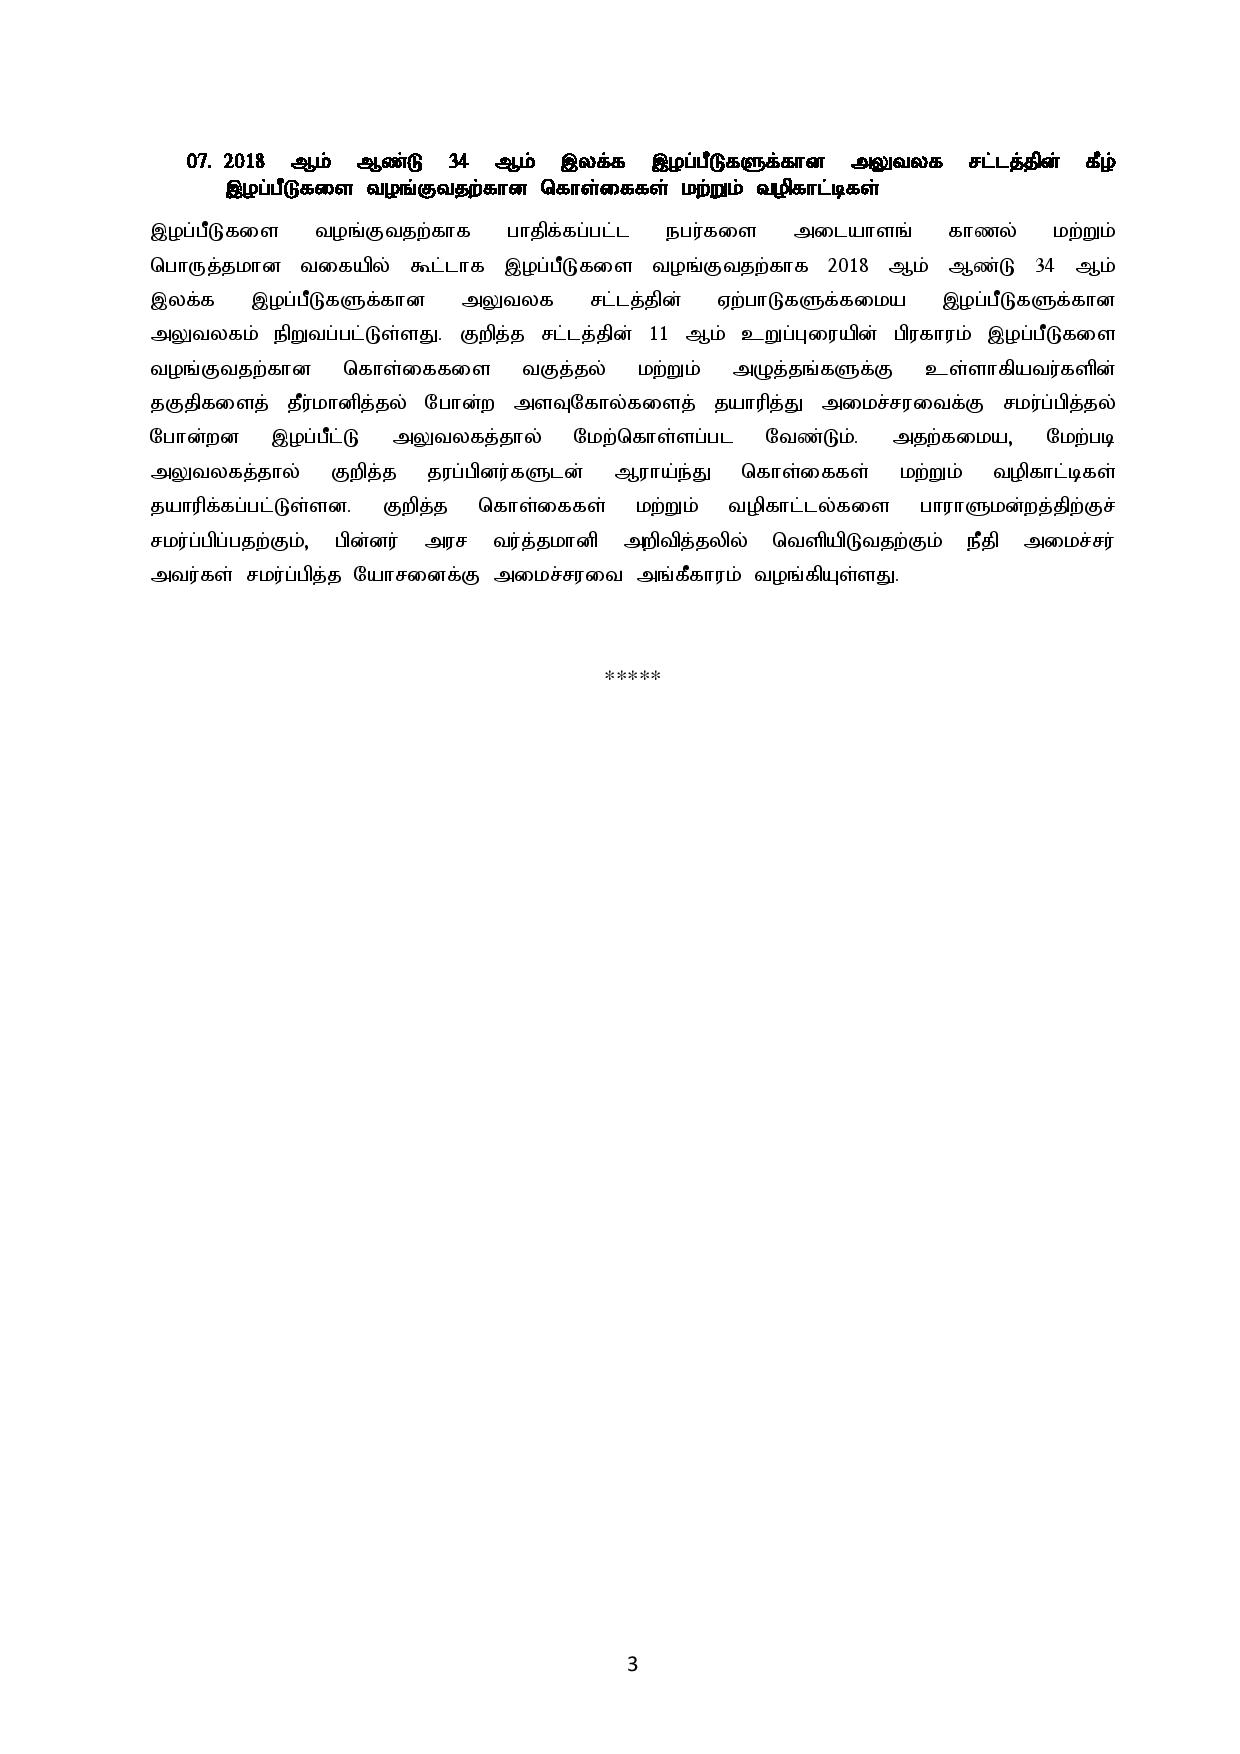 Cabinet Decisions on 20.12.2021 Tamil page 003